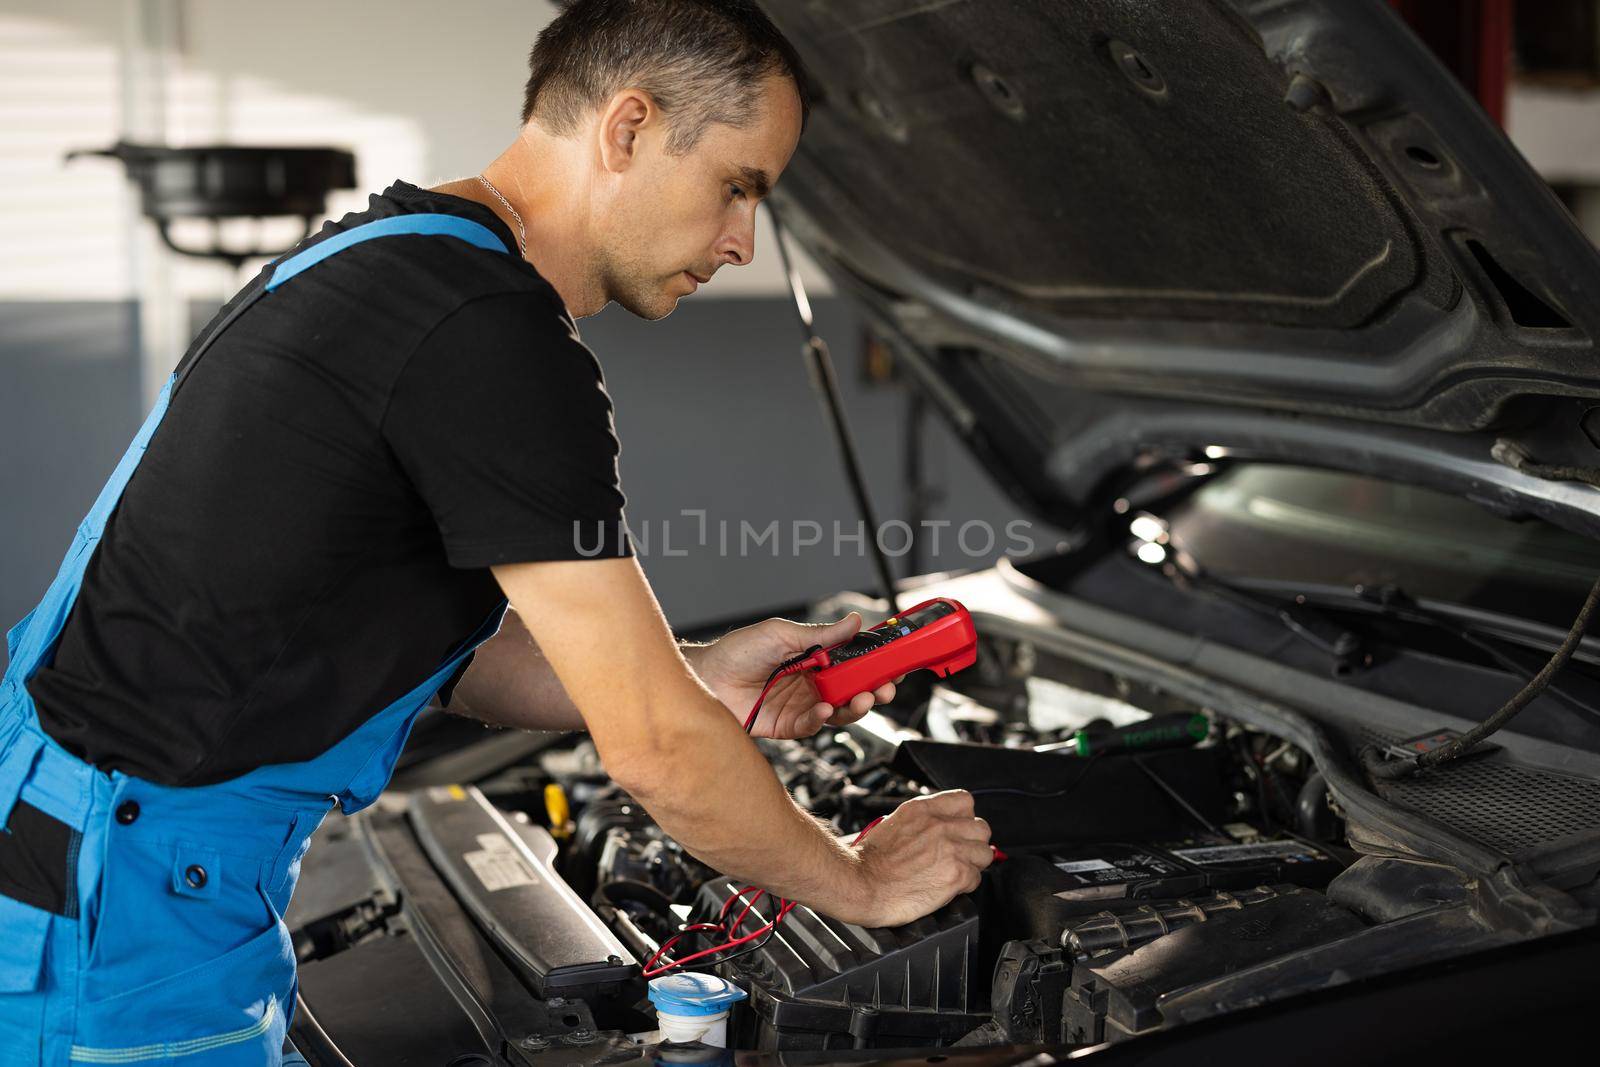 Professional car mechanic check battery voltage with electric multimeter. Automobile diagnosis. Car mechanic repairer looks for engine failure on diagnostics equipment in vehicle service workshop.